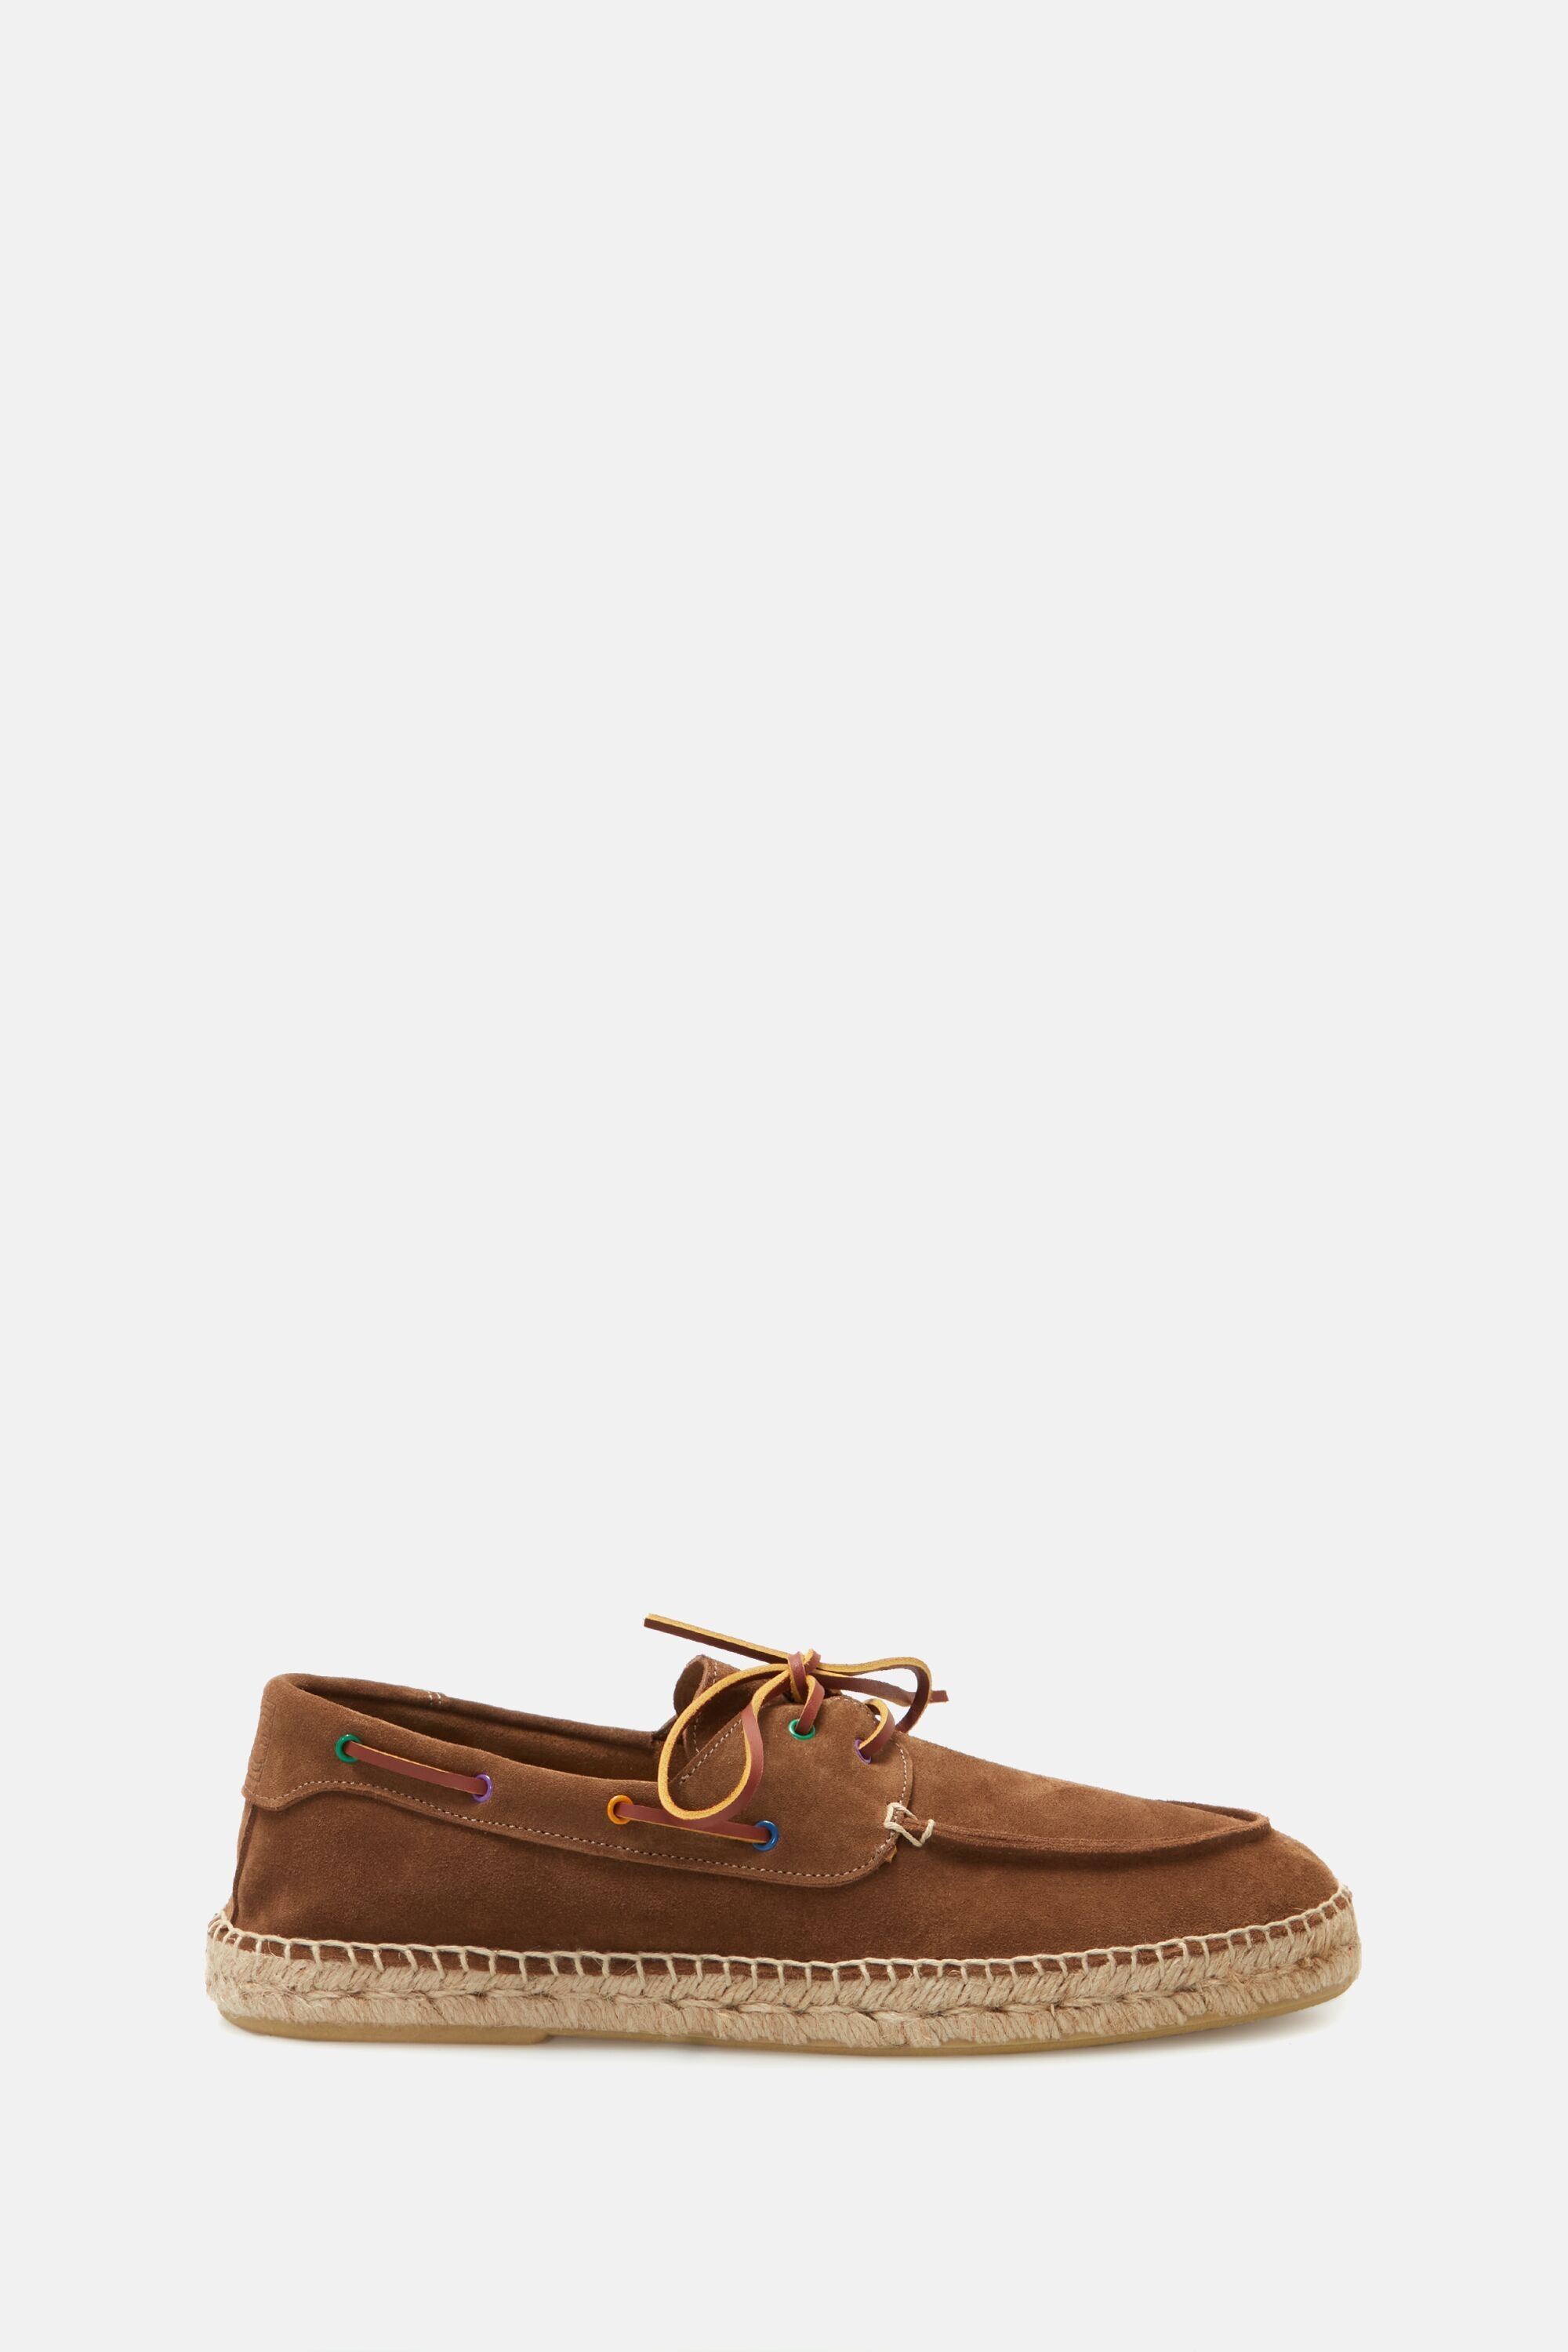 Suede espadrille boat shoes